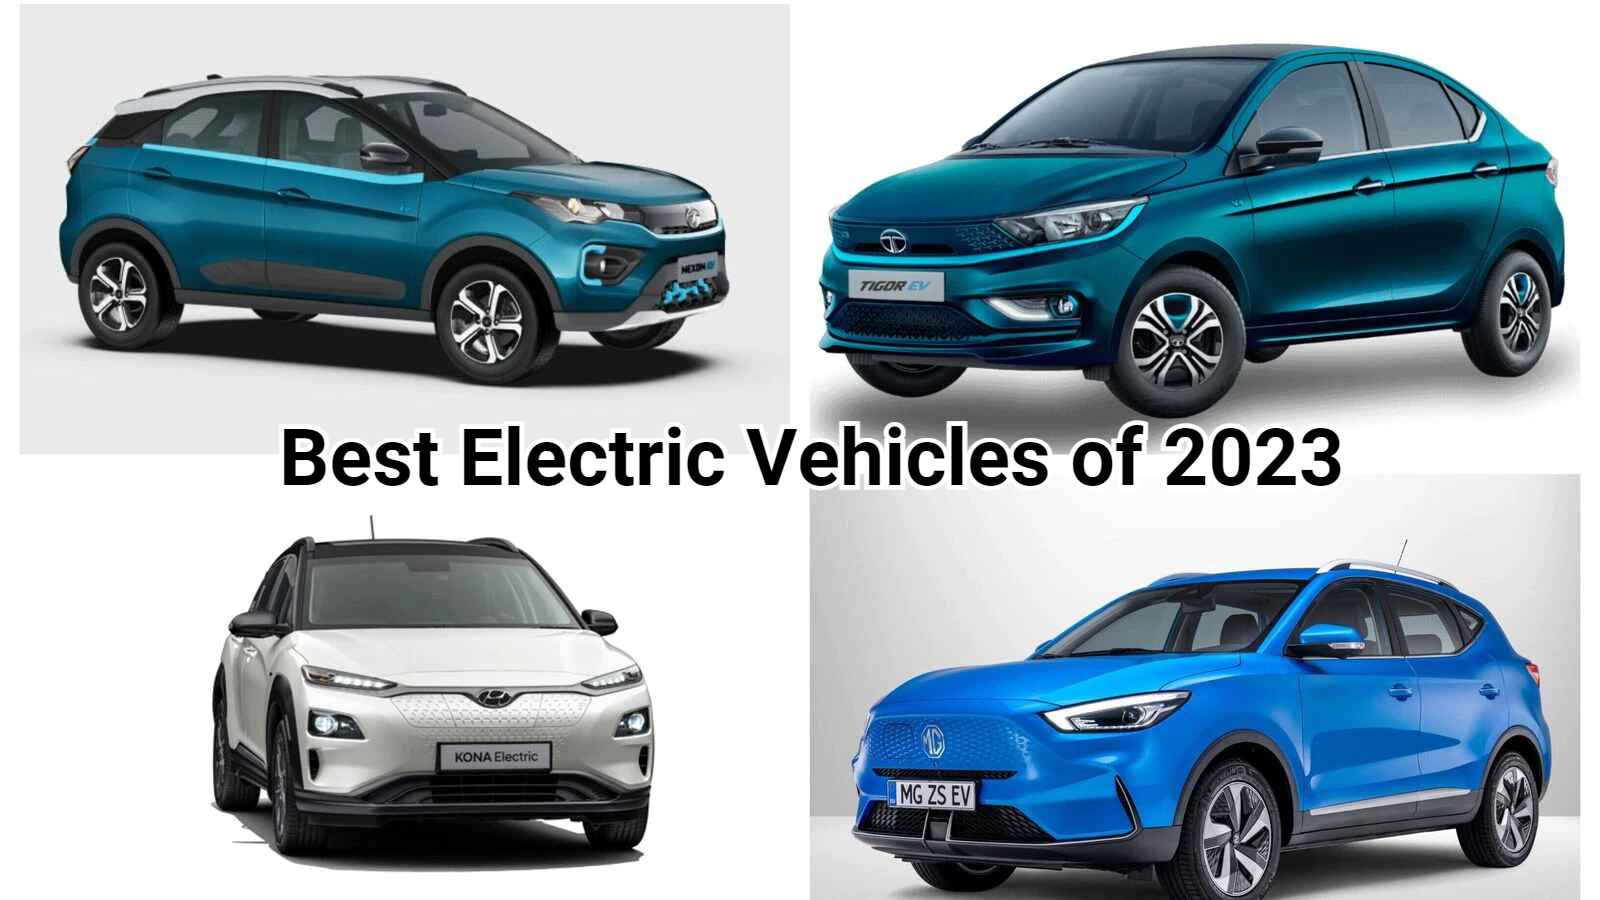 7 Best Electric Vehicles of 2023